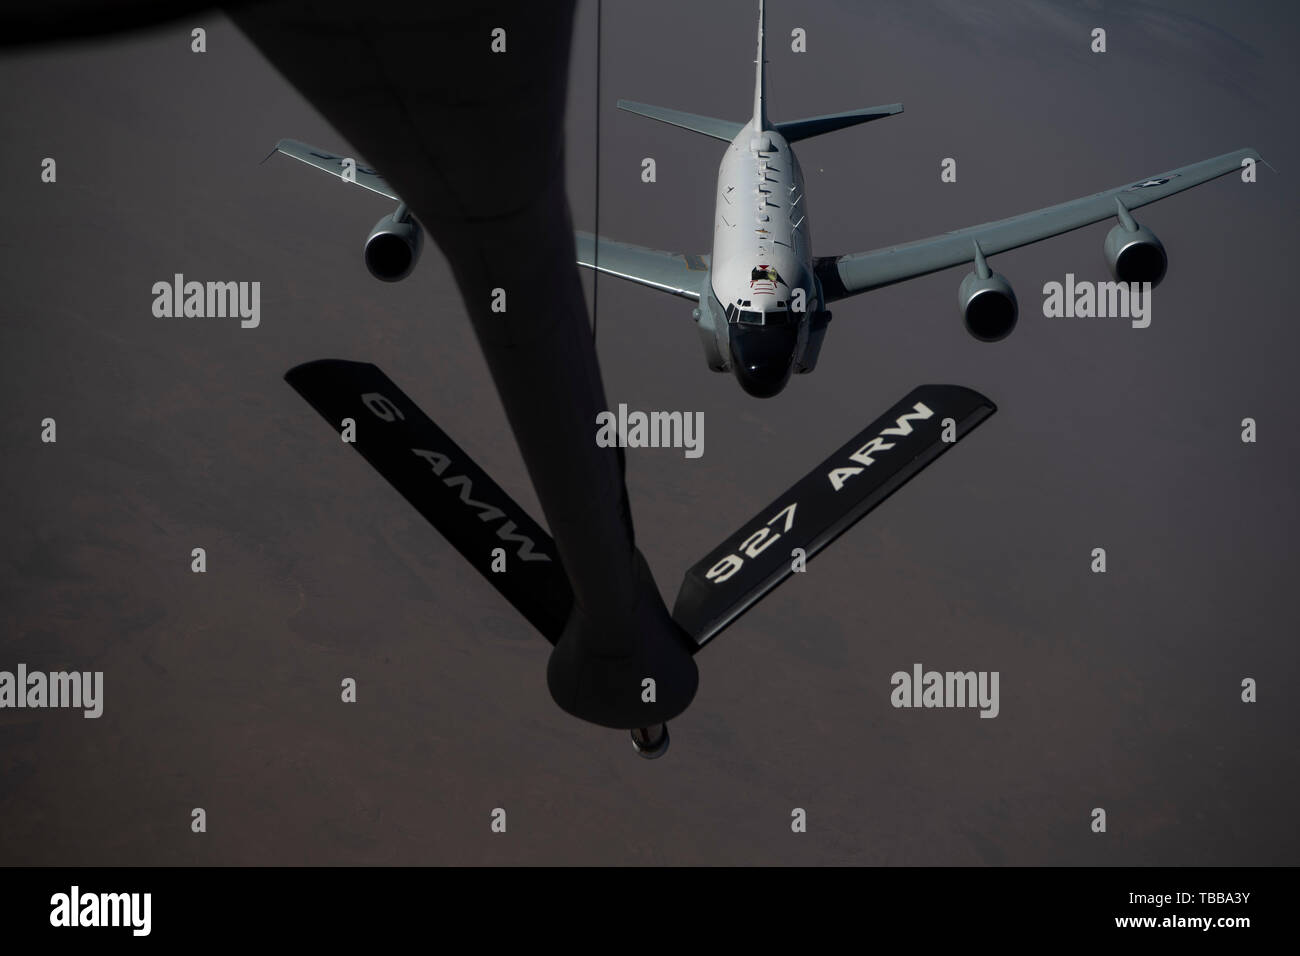 A U.S. Air Force RC-135 Rivet Joint receives fuel from a KC-135 Stratotanker during a mission within the U.S. Air Force Central Command Area of Responsibility May 26, 2019. The Rivet Joint supports theater and national level consumers with near real time on-screen intelligence collection, analysis and dissemination capabilities. (U.S. Air Force photo by Master Sgt. Russ Scalf) Stock Photo